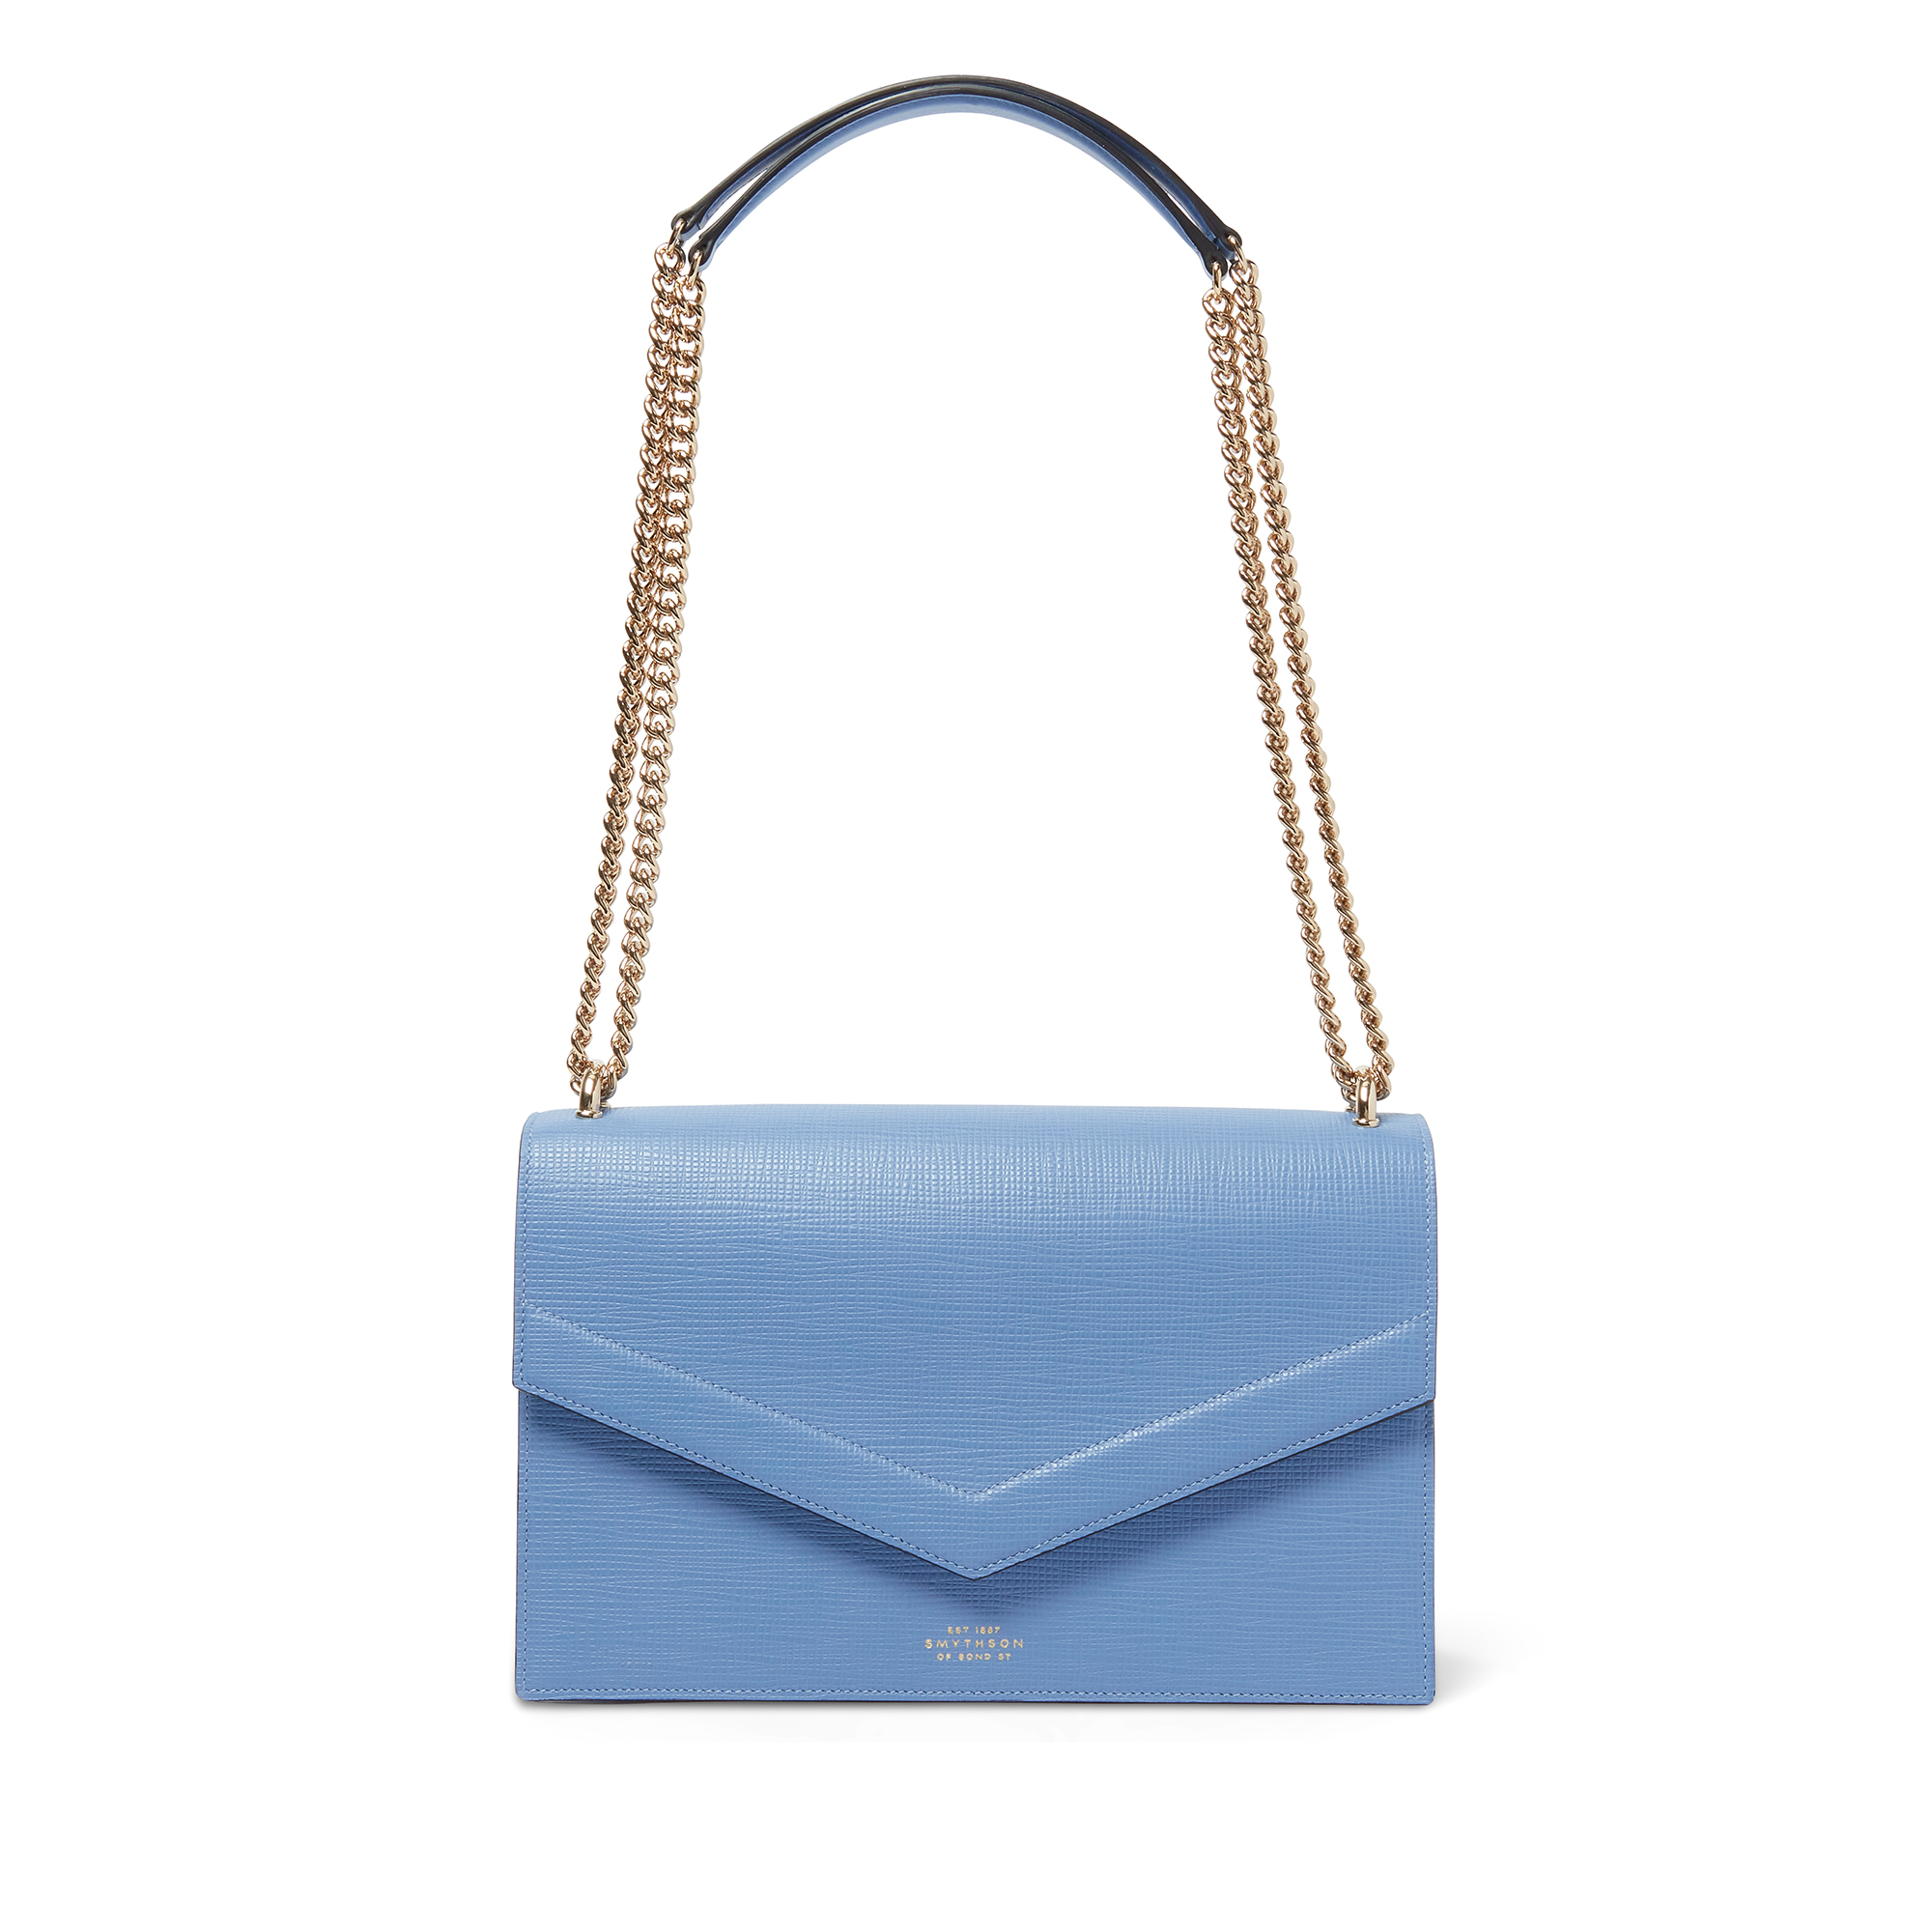 SMYTHSON Textured-leather messenger bag | Sale up to 70% off | THE OUTNET